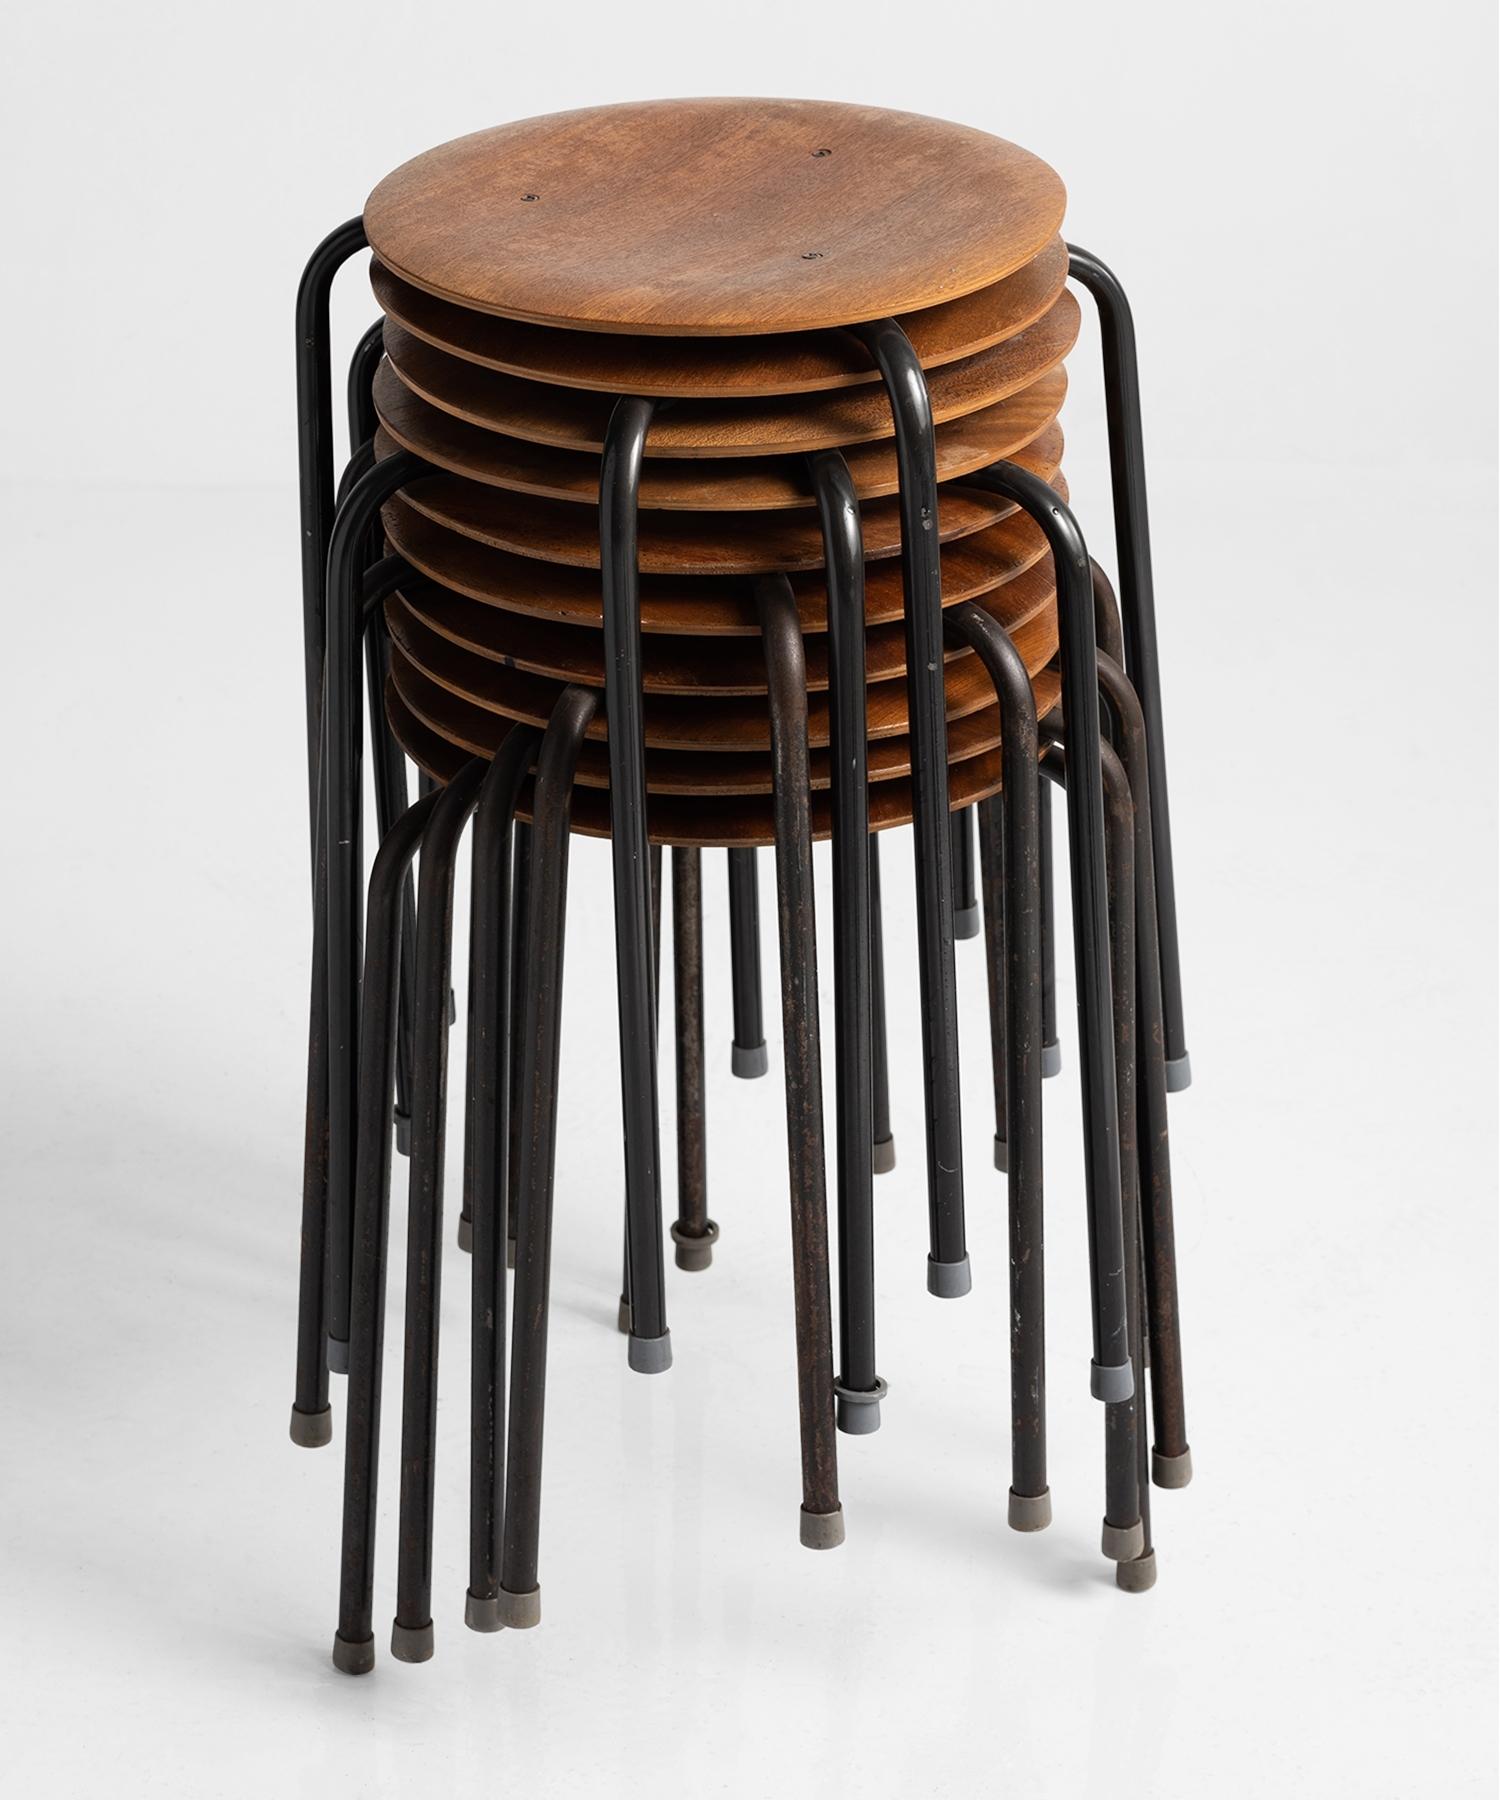 Mid-20th Century Industrial Stacking Stool, England, circa 1950